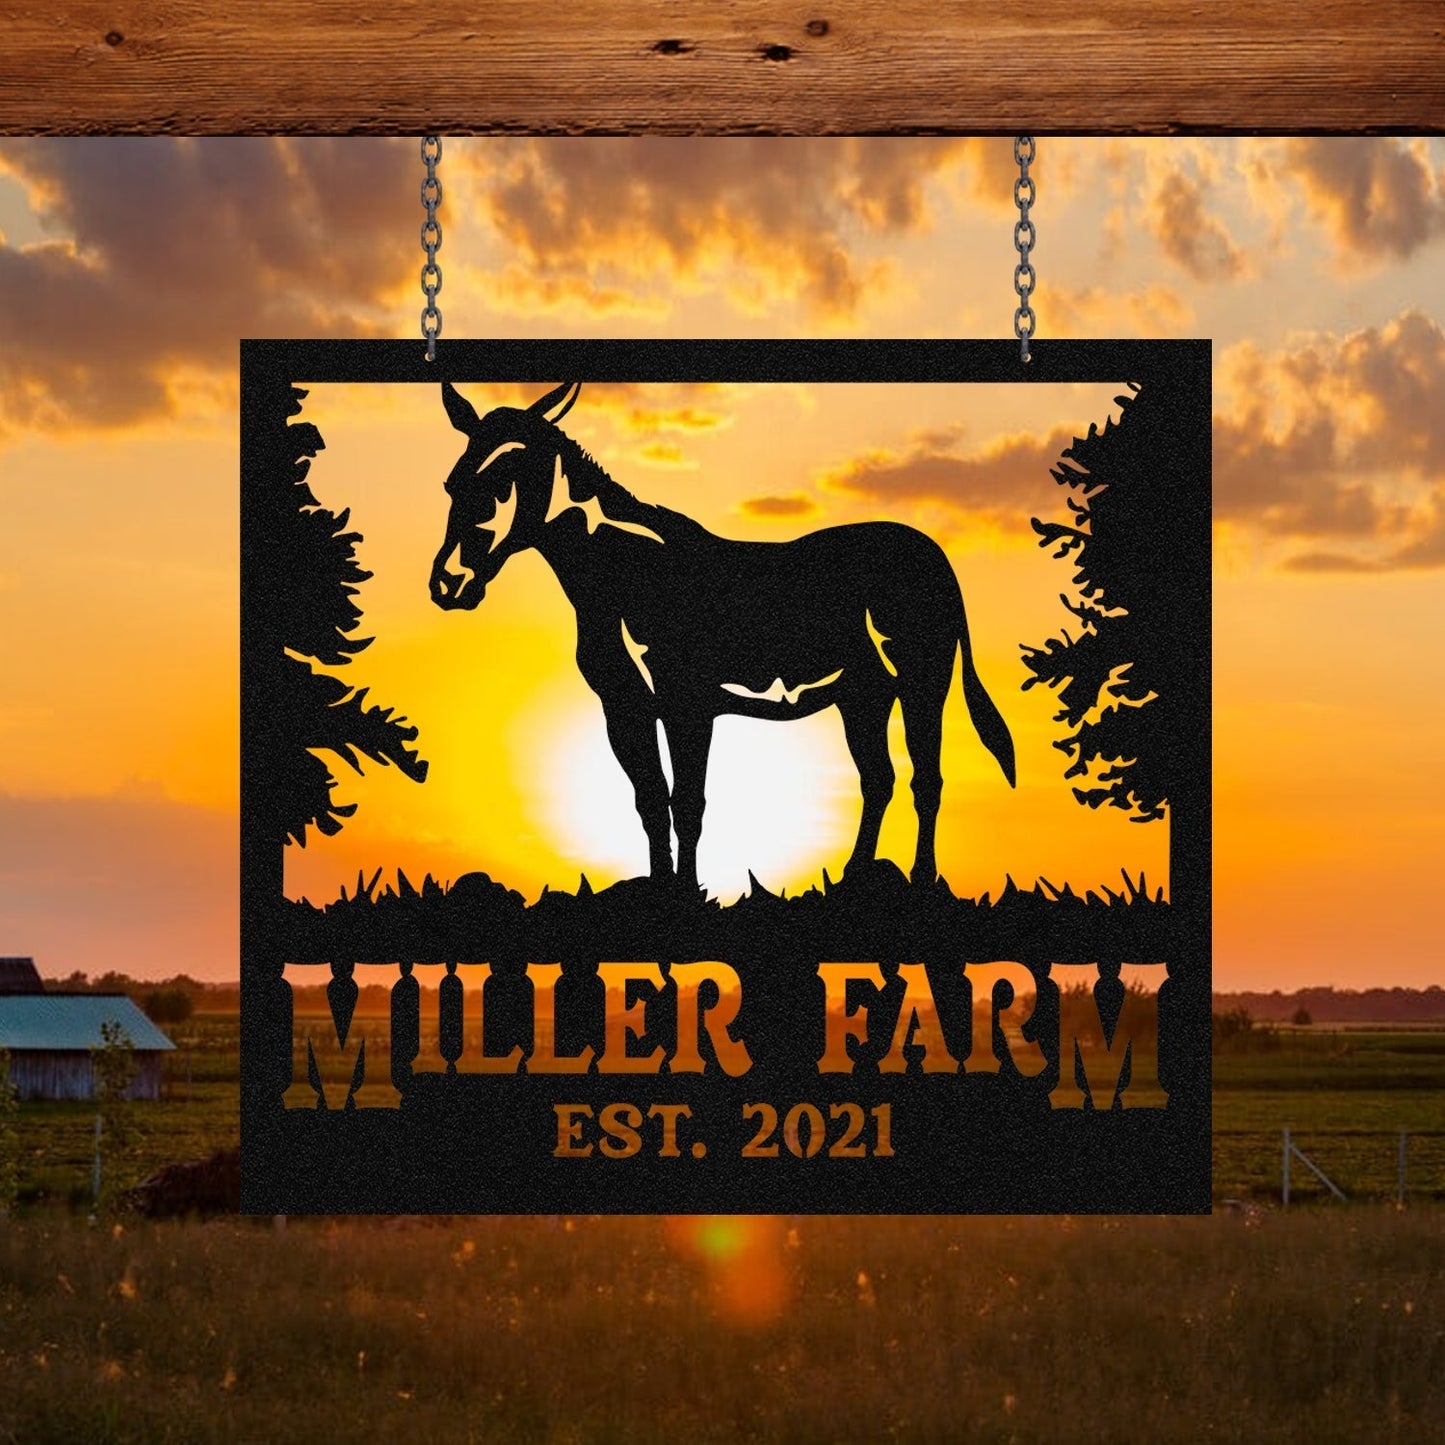 Personalized Metal Farm Sign Mule Monogram Custom Outdoor Farmhouse Front Gate Ranch Stable Wall Decor Art Gift